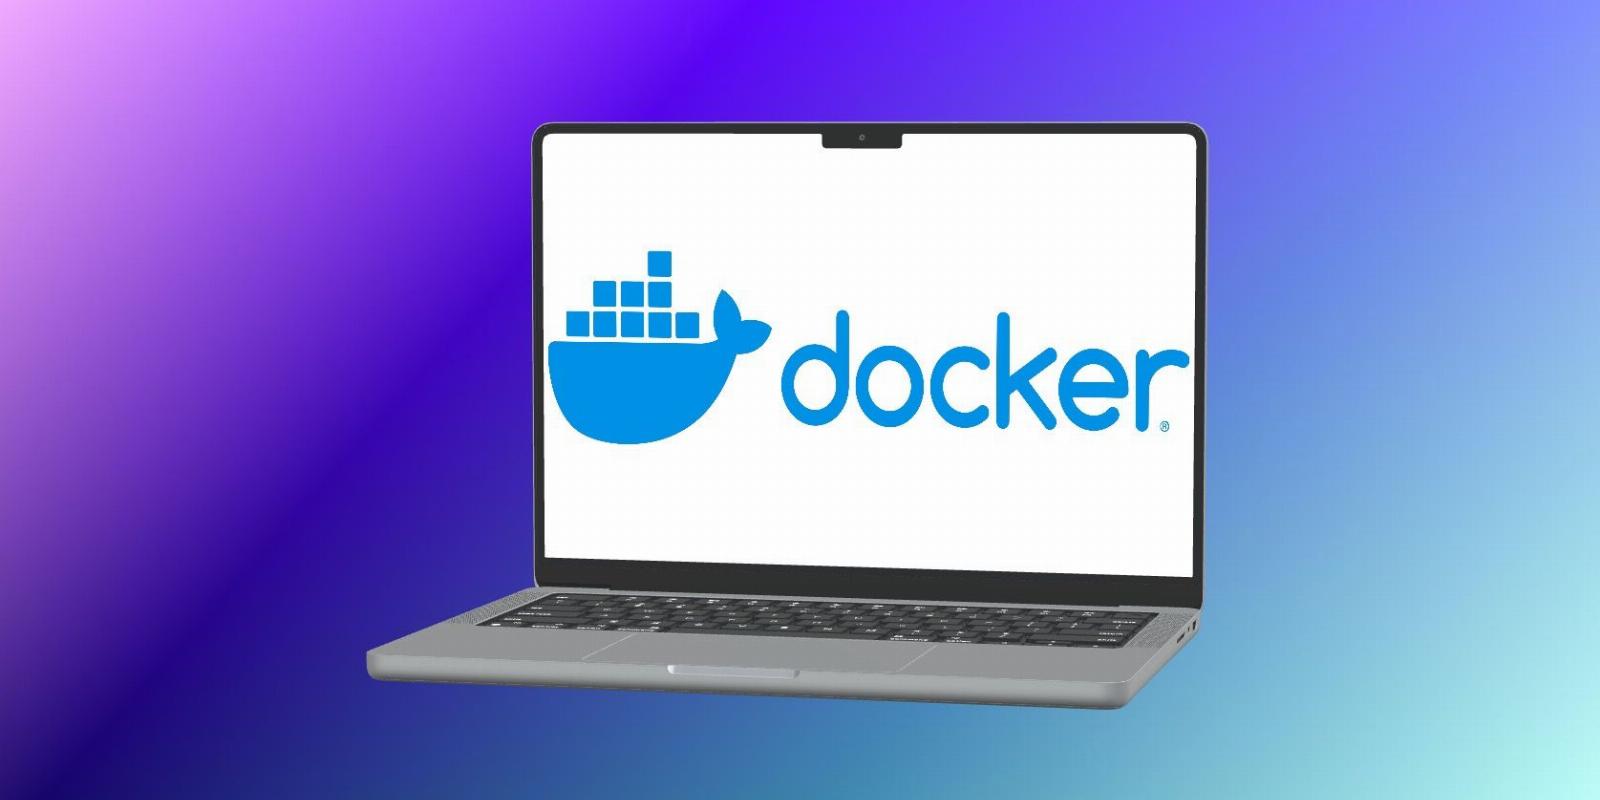 How to Install Docker on a Mac